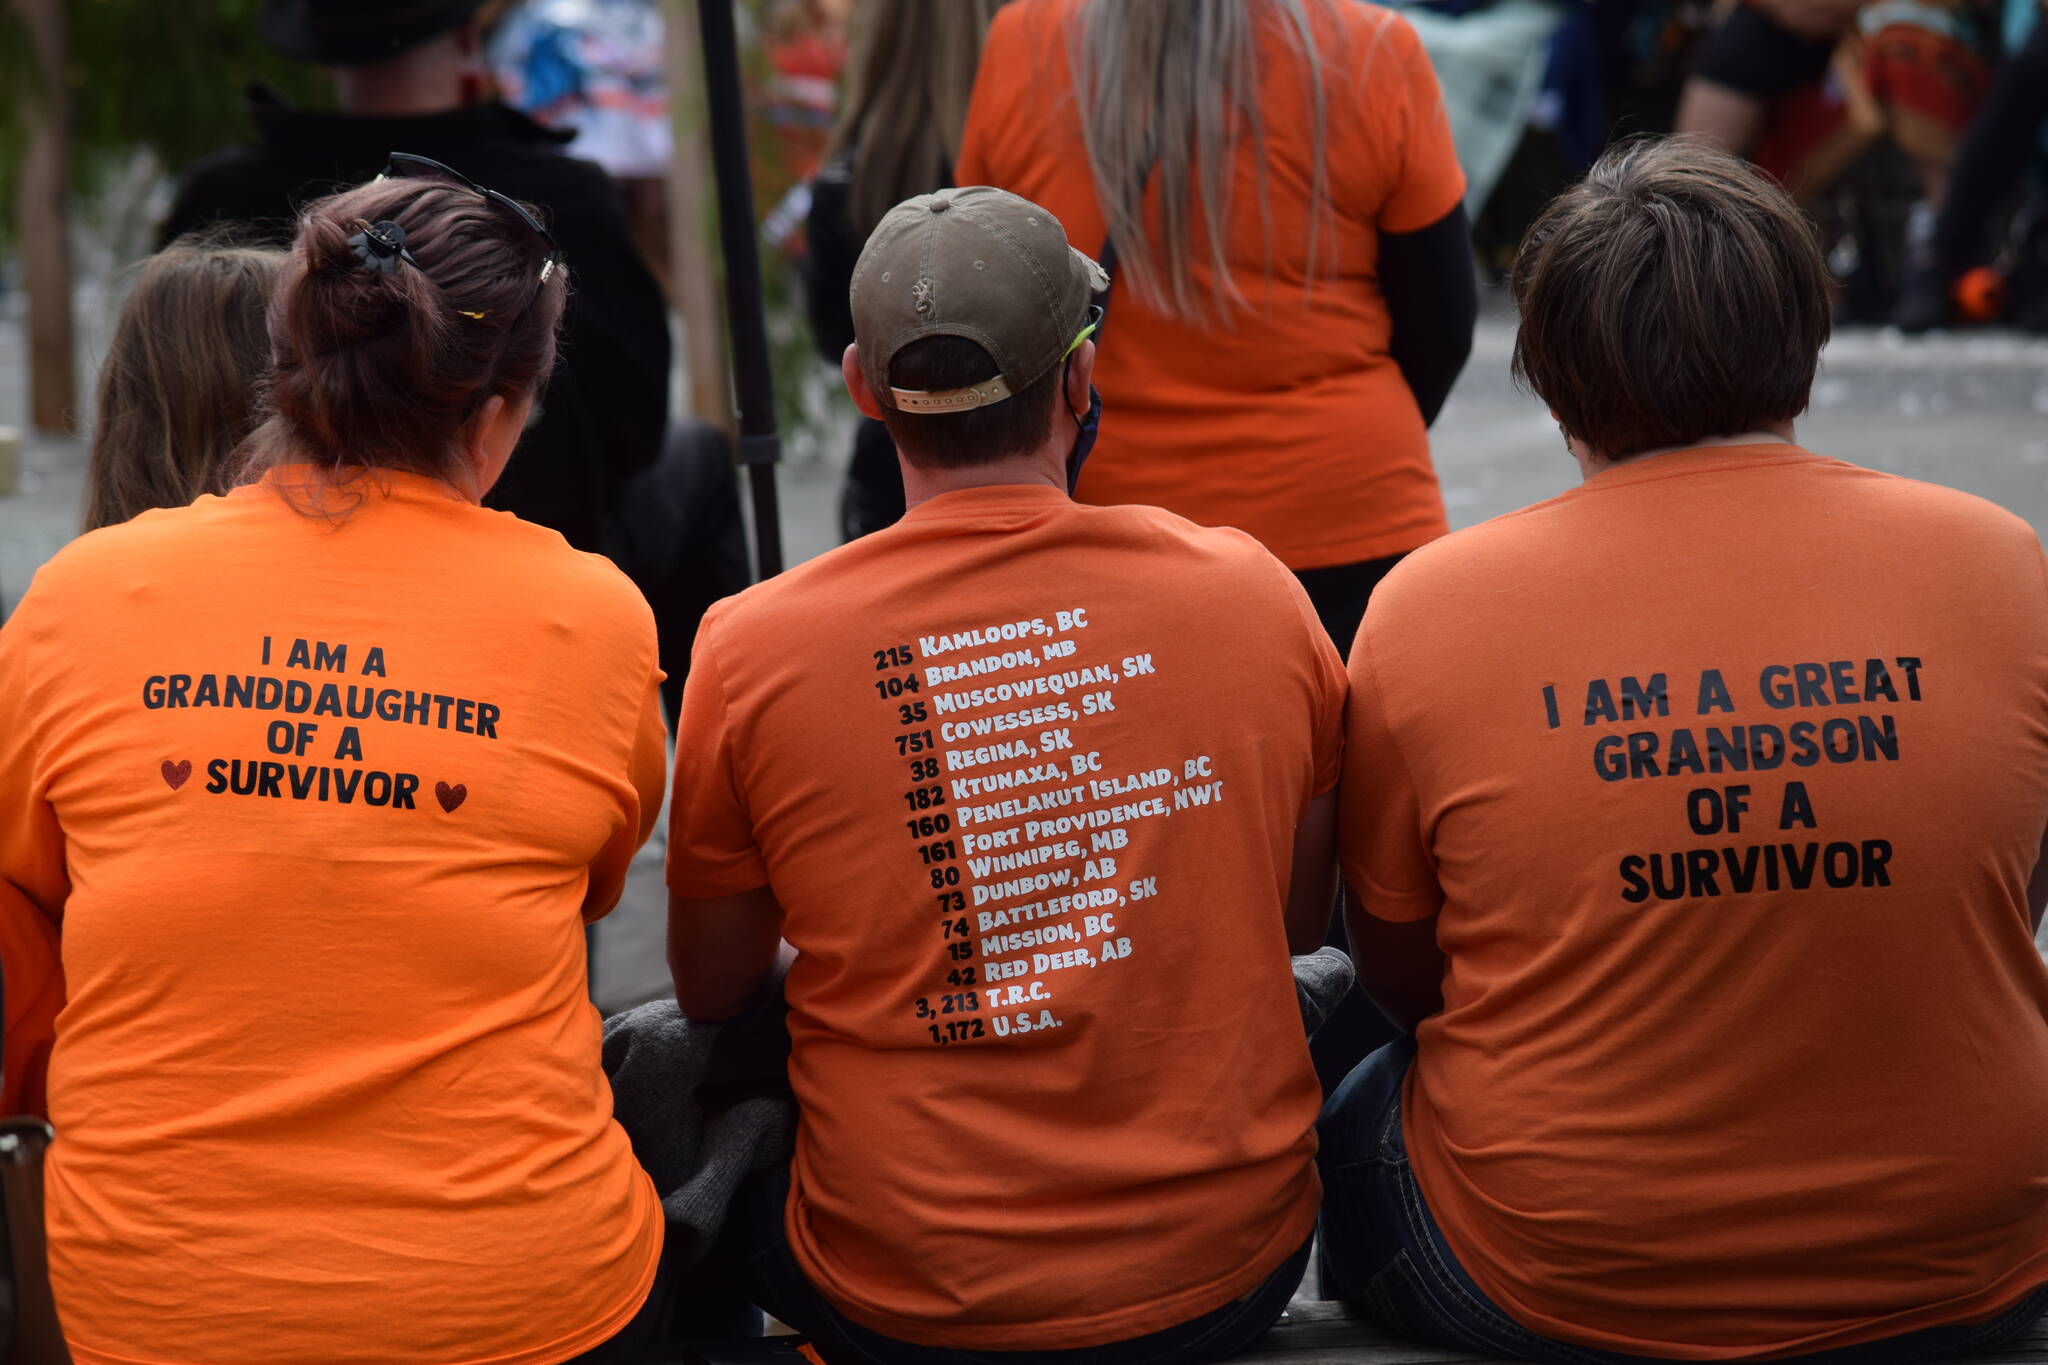 The t-shirts of attendees at Campbell River’s National Day of Truth and Reconciliation ceremony illustrate the continual effect of Canada’s residential school system on multiple generations. (Ronan O’Doherty, Campbell River Mirror)